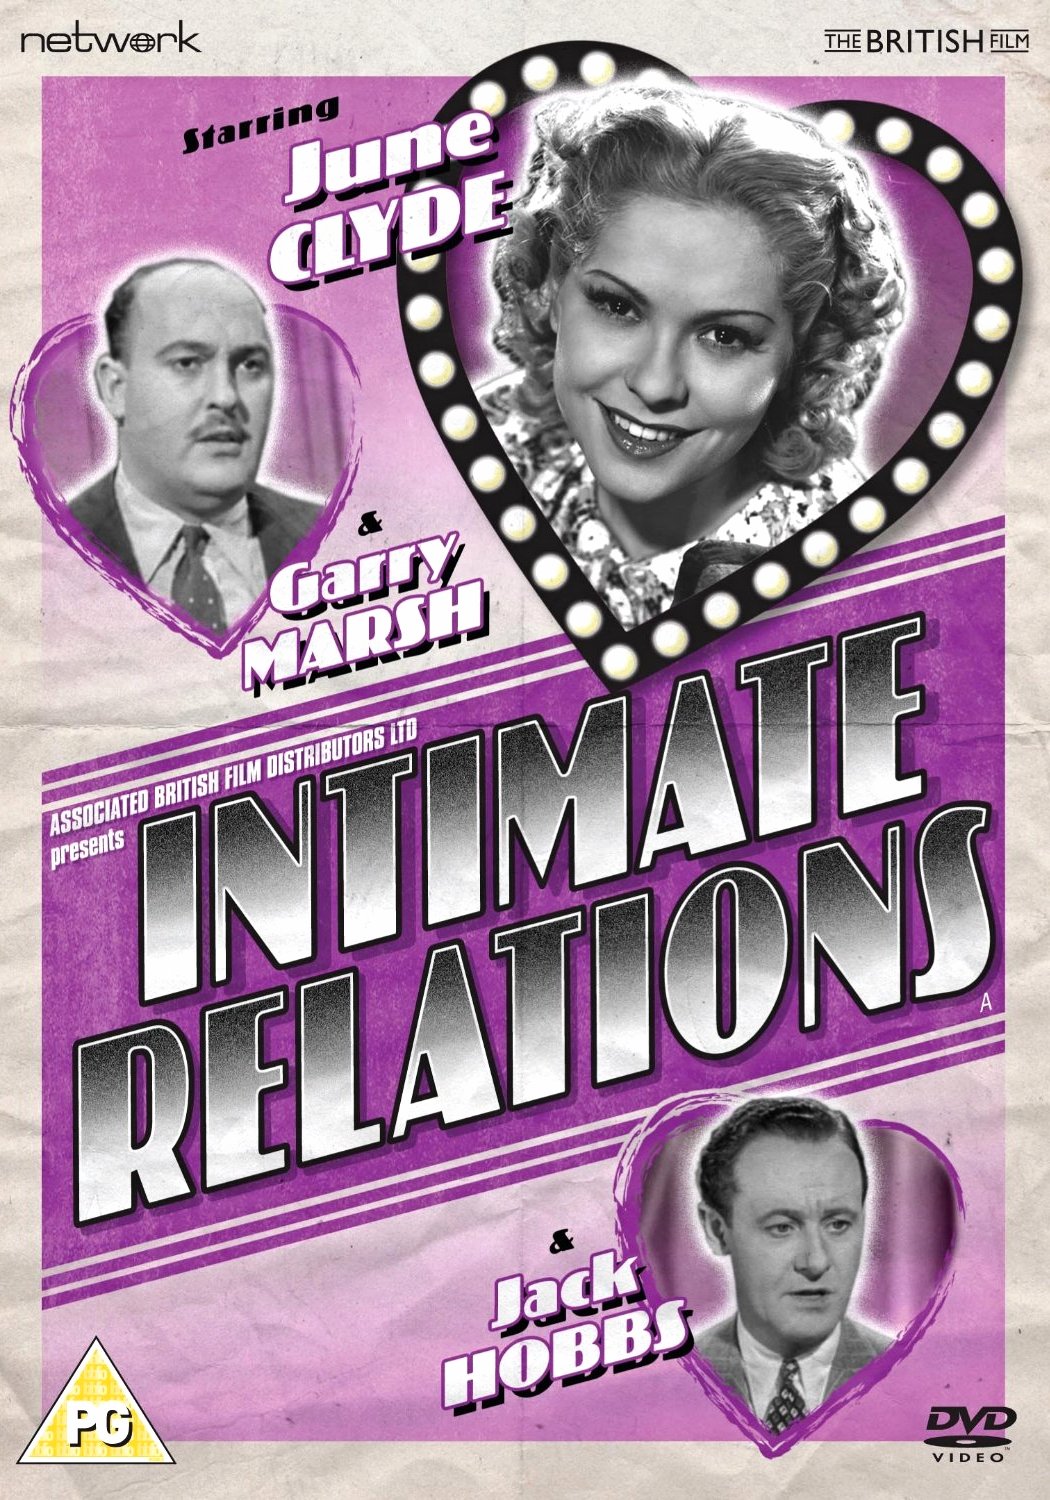 Intimate Relations DVD from Network and The British Film.  Features June Clyde, Garry Marsh and Jack Hobbs.